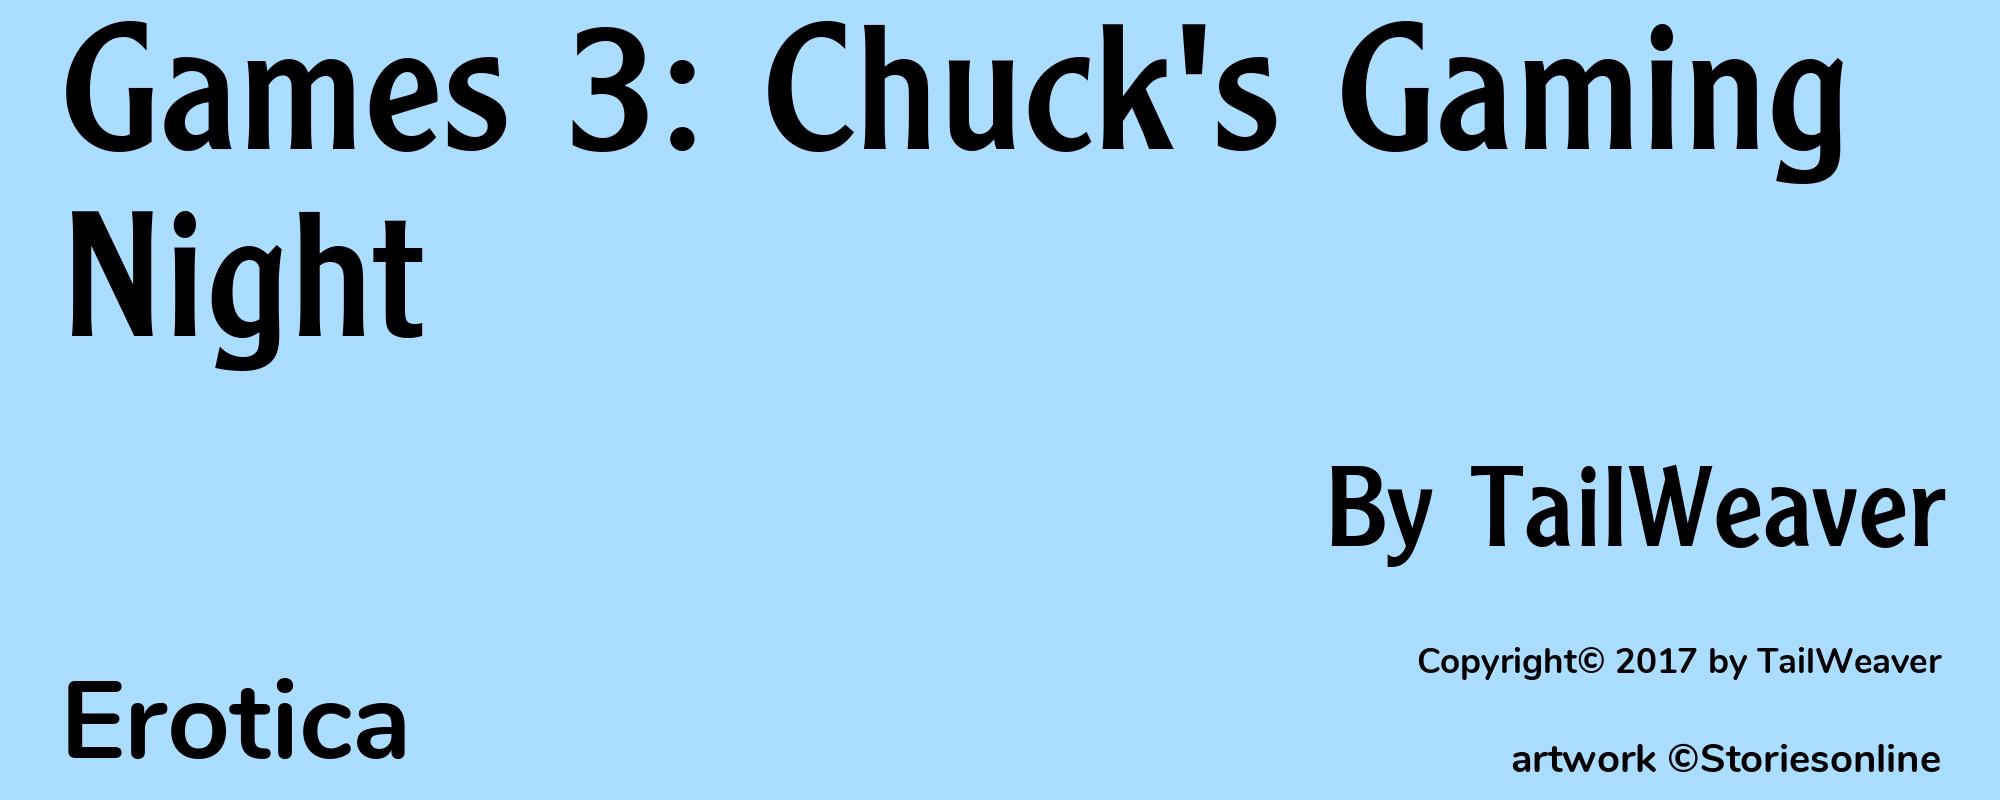 Games 3: Chuck's Gaming Night - Cover